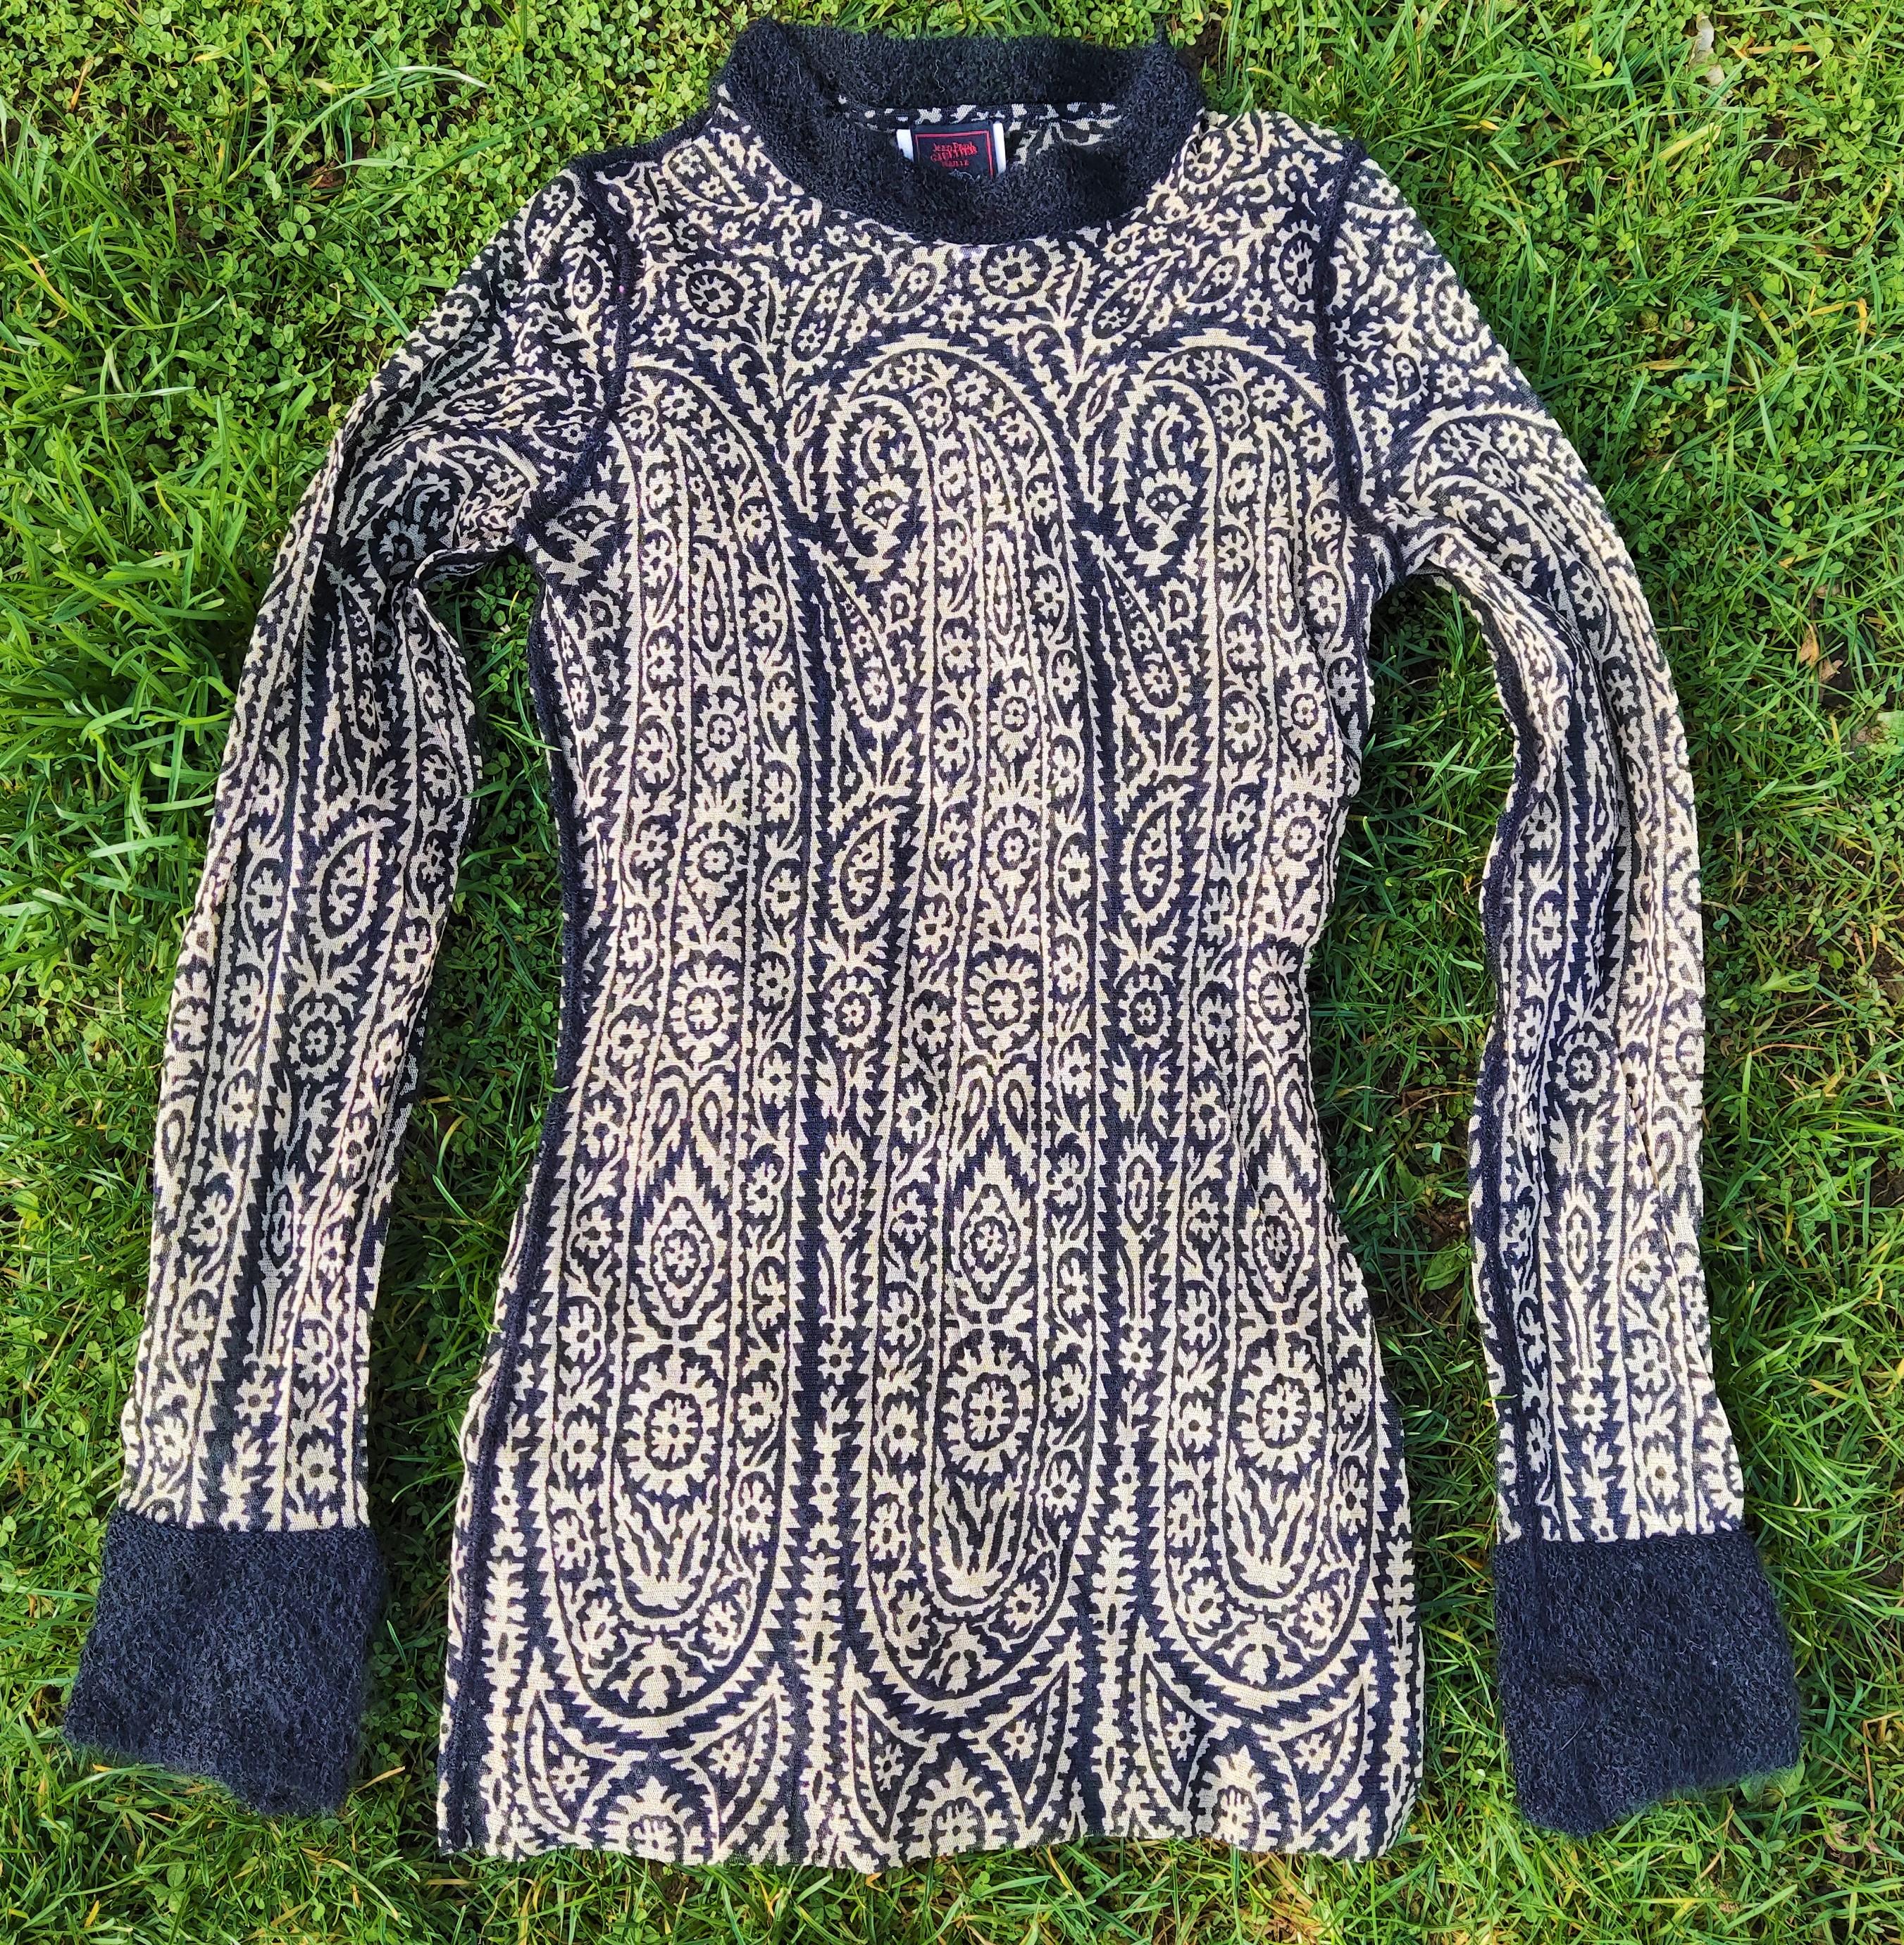 Paisley (Persian motif) mesh top by Jean Paul Gaultier! 
Transparent.

EXCELLENT Condition! 

SIZE: it fits from XS to medium (marked size: S). Extremly stretchy fabric!
Length:  64 cm / 25.2 inch
Armpit to armpit: 35 cm / 13.8 cm
Sleeve: 61 cm / 24